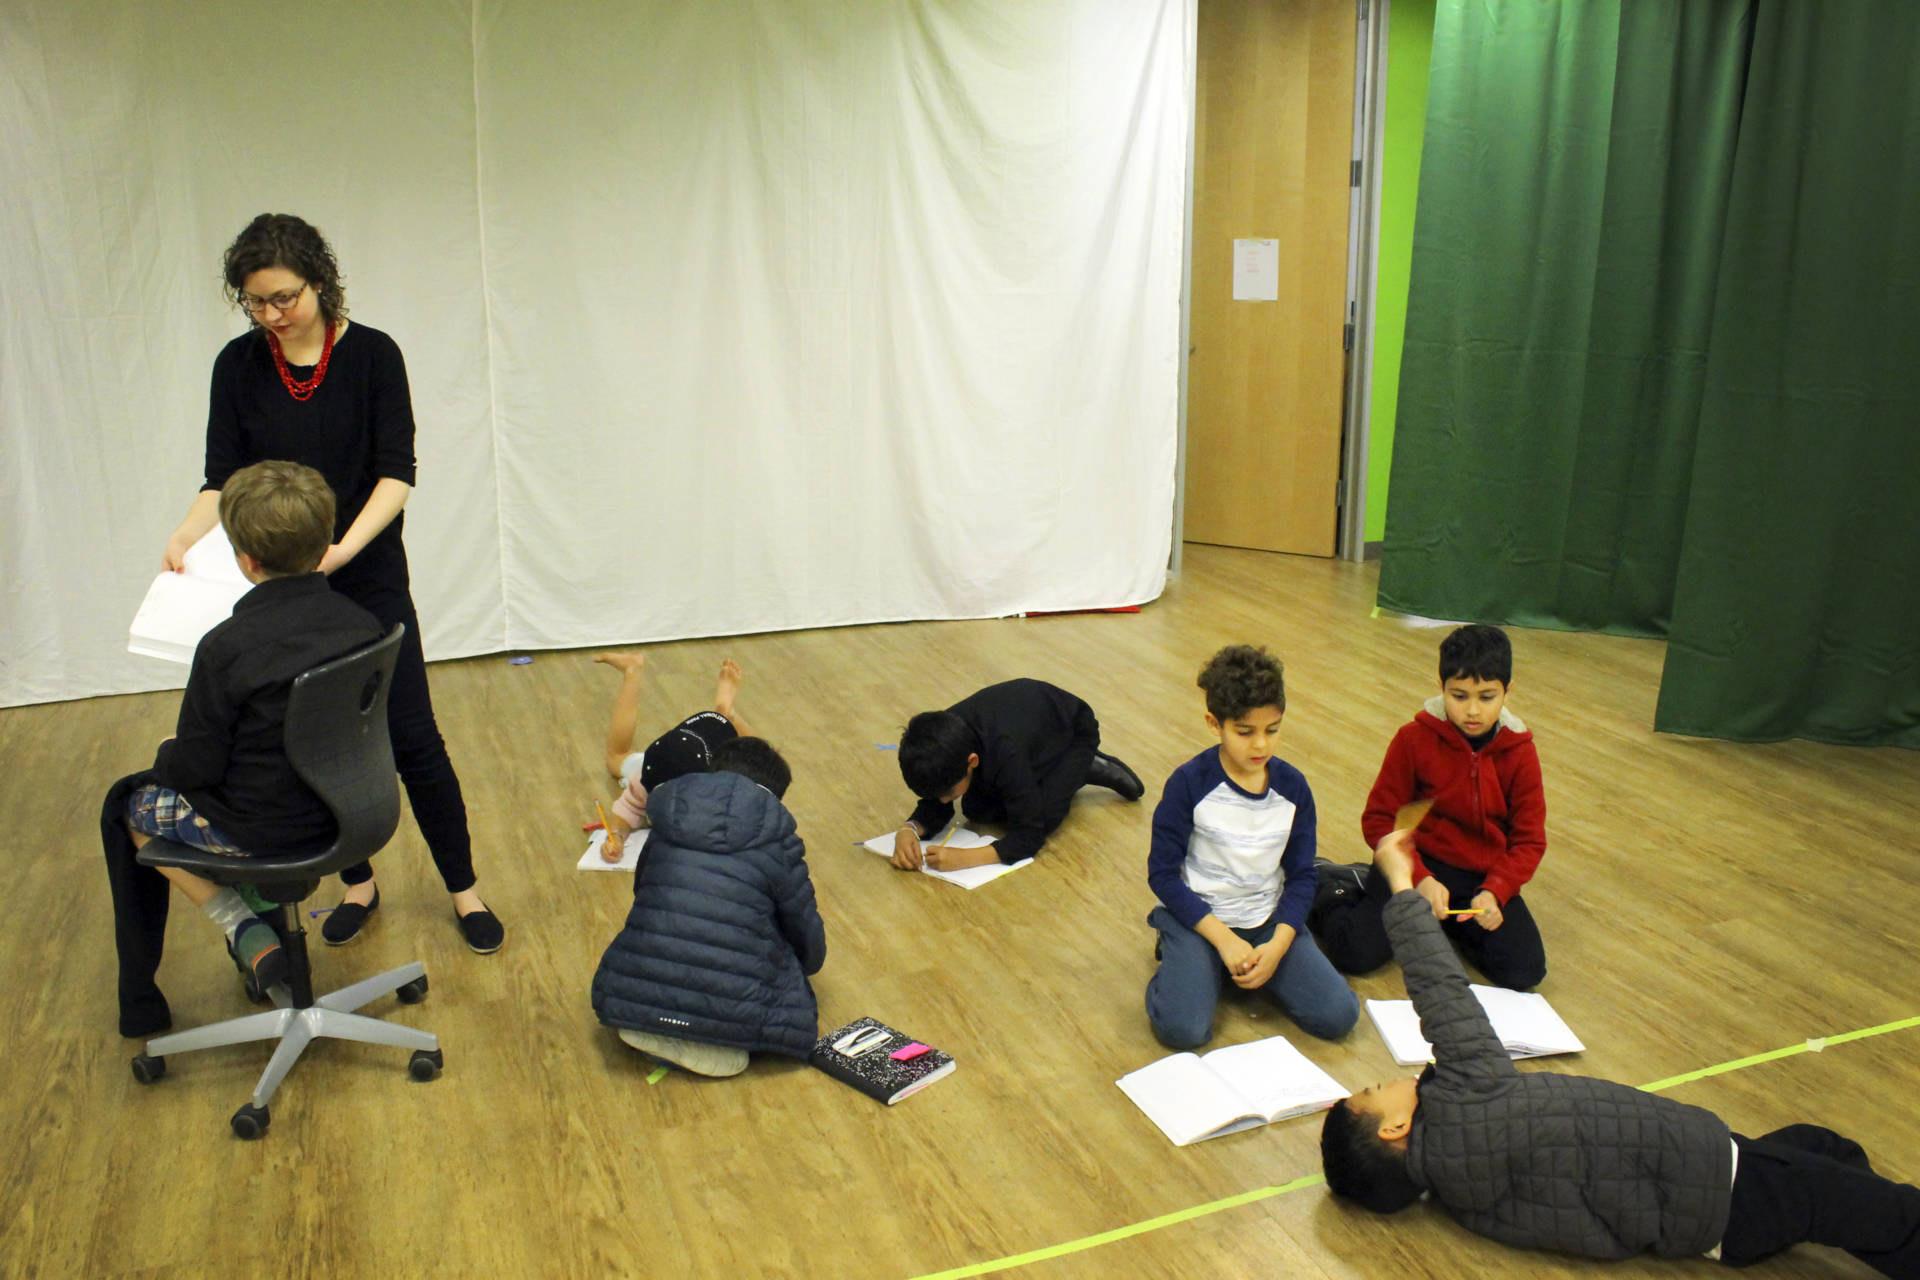 Students rehearse a play at the Khan lab school.